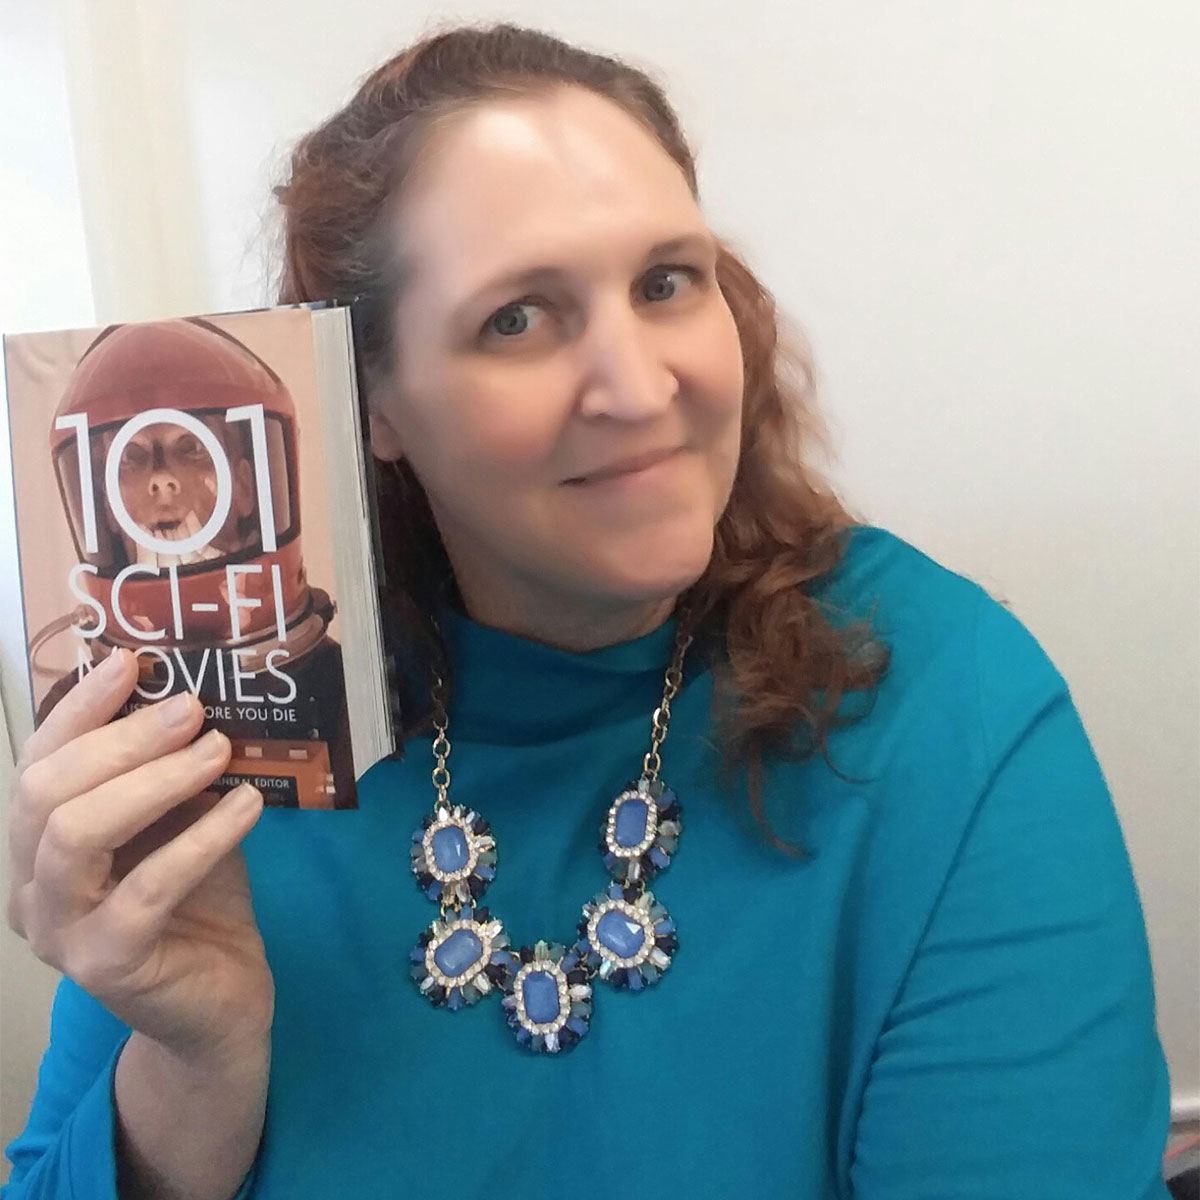 Carma, The Genre Traveler, with the book 101 Sci-Fi Movies